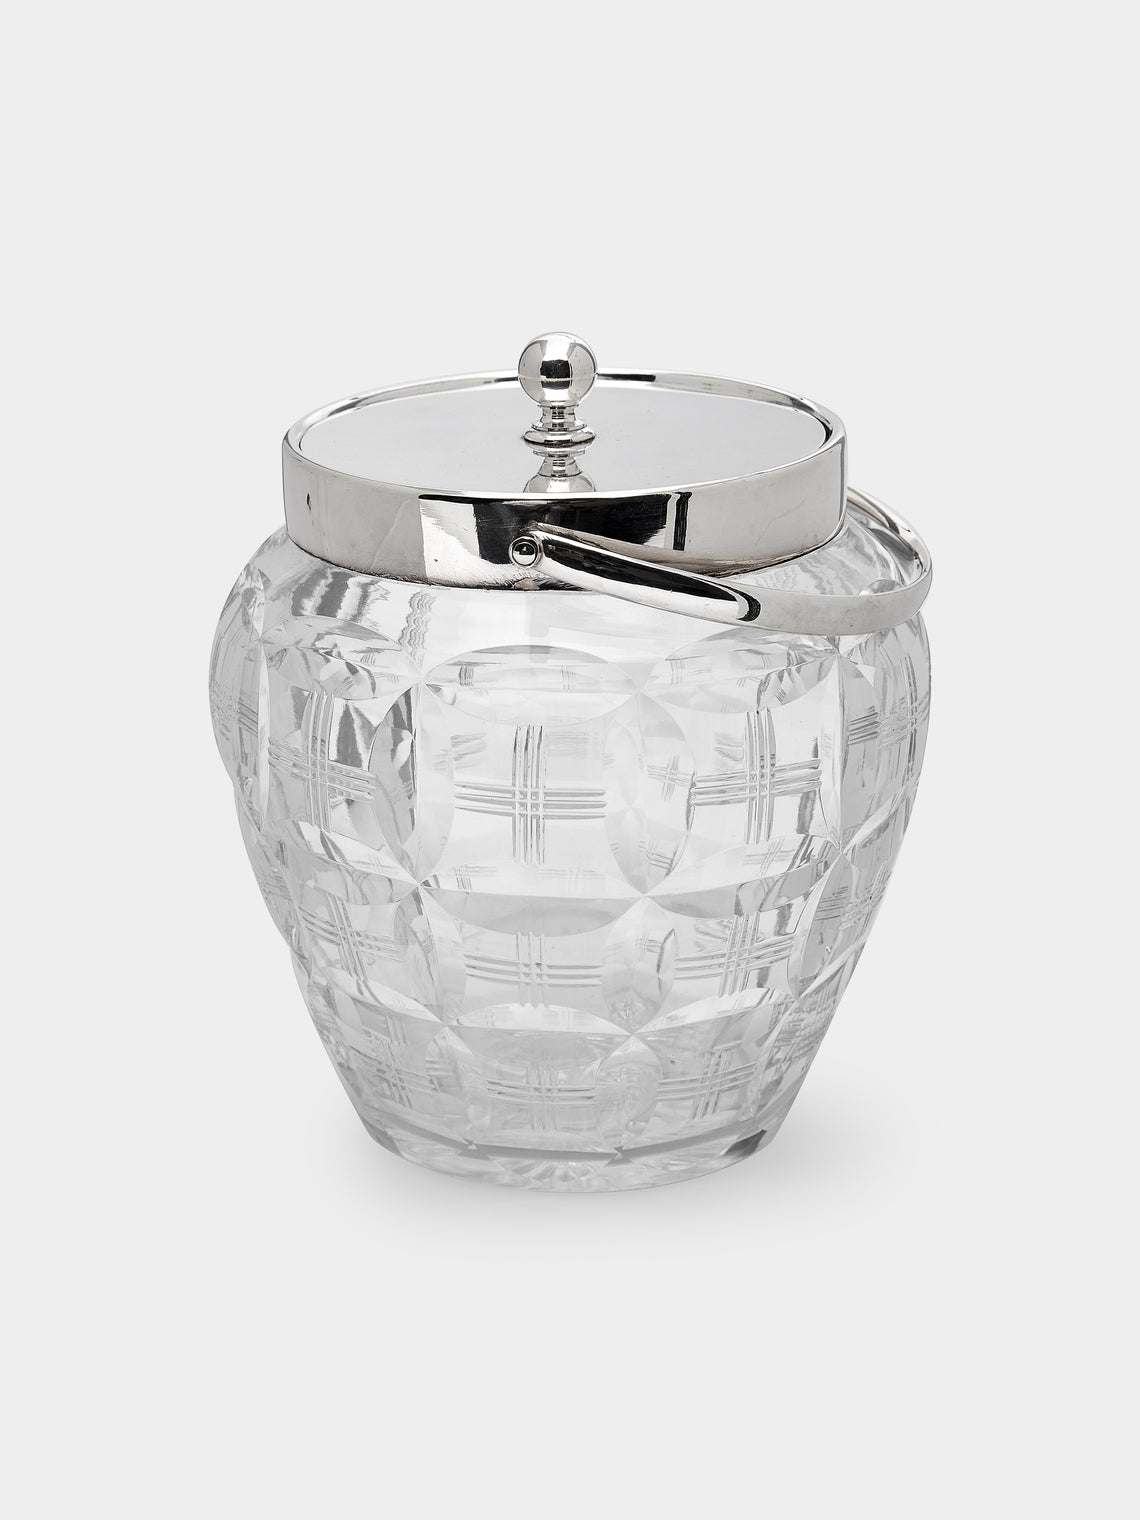 Antique and Vintage - 1940s Silver-Plated Cut Crystal Ice Bucket -  - ABASK - 